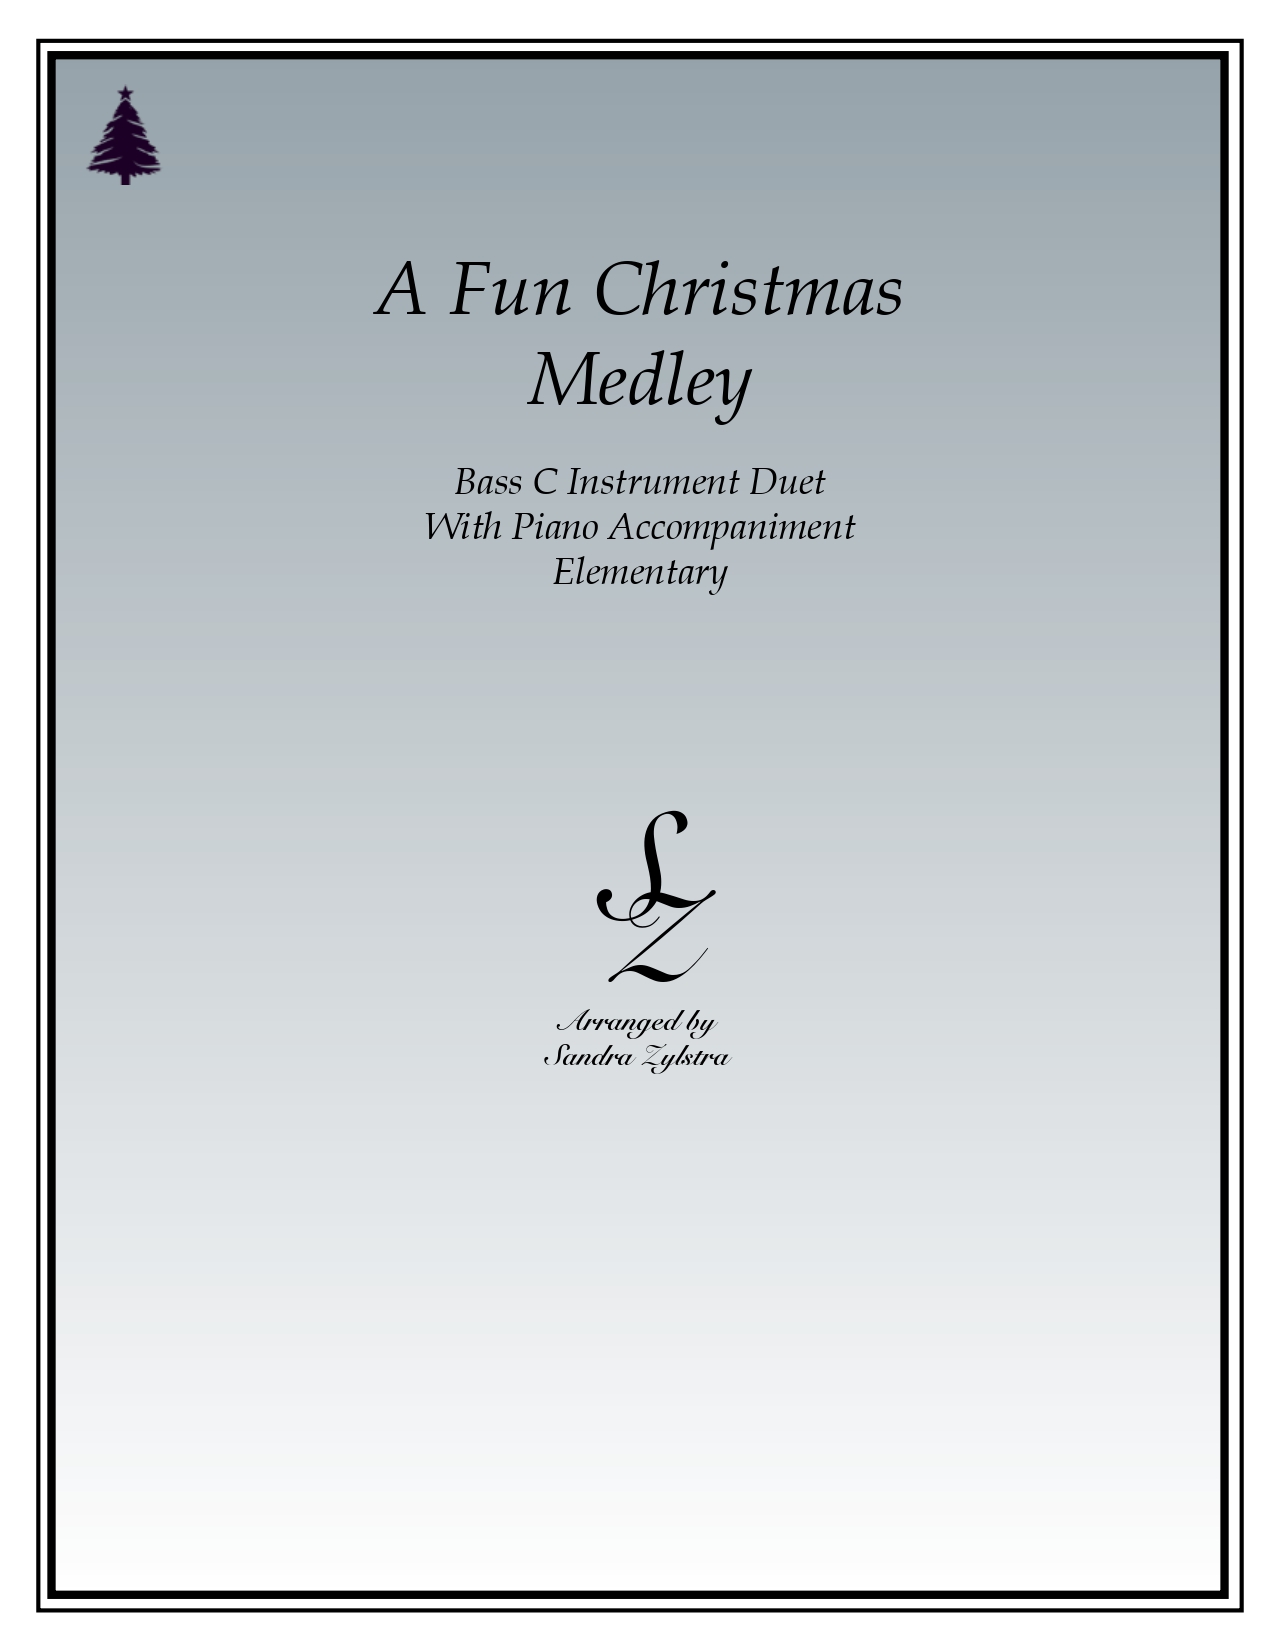 A Fun Christmas Medley bass C instrument duet parts cover page 00011